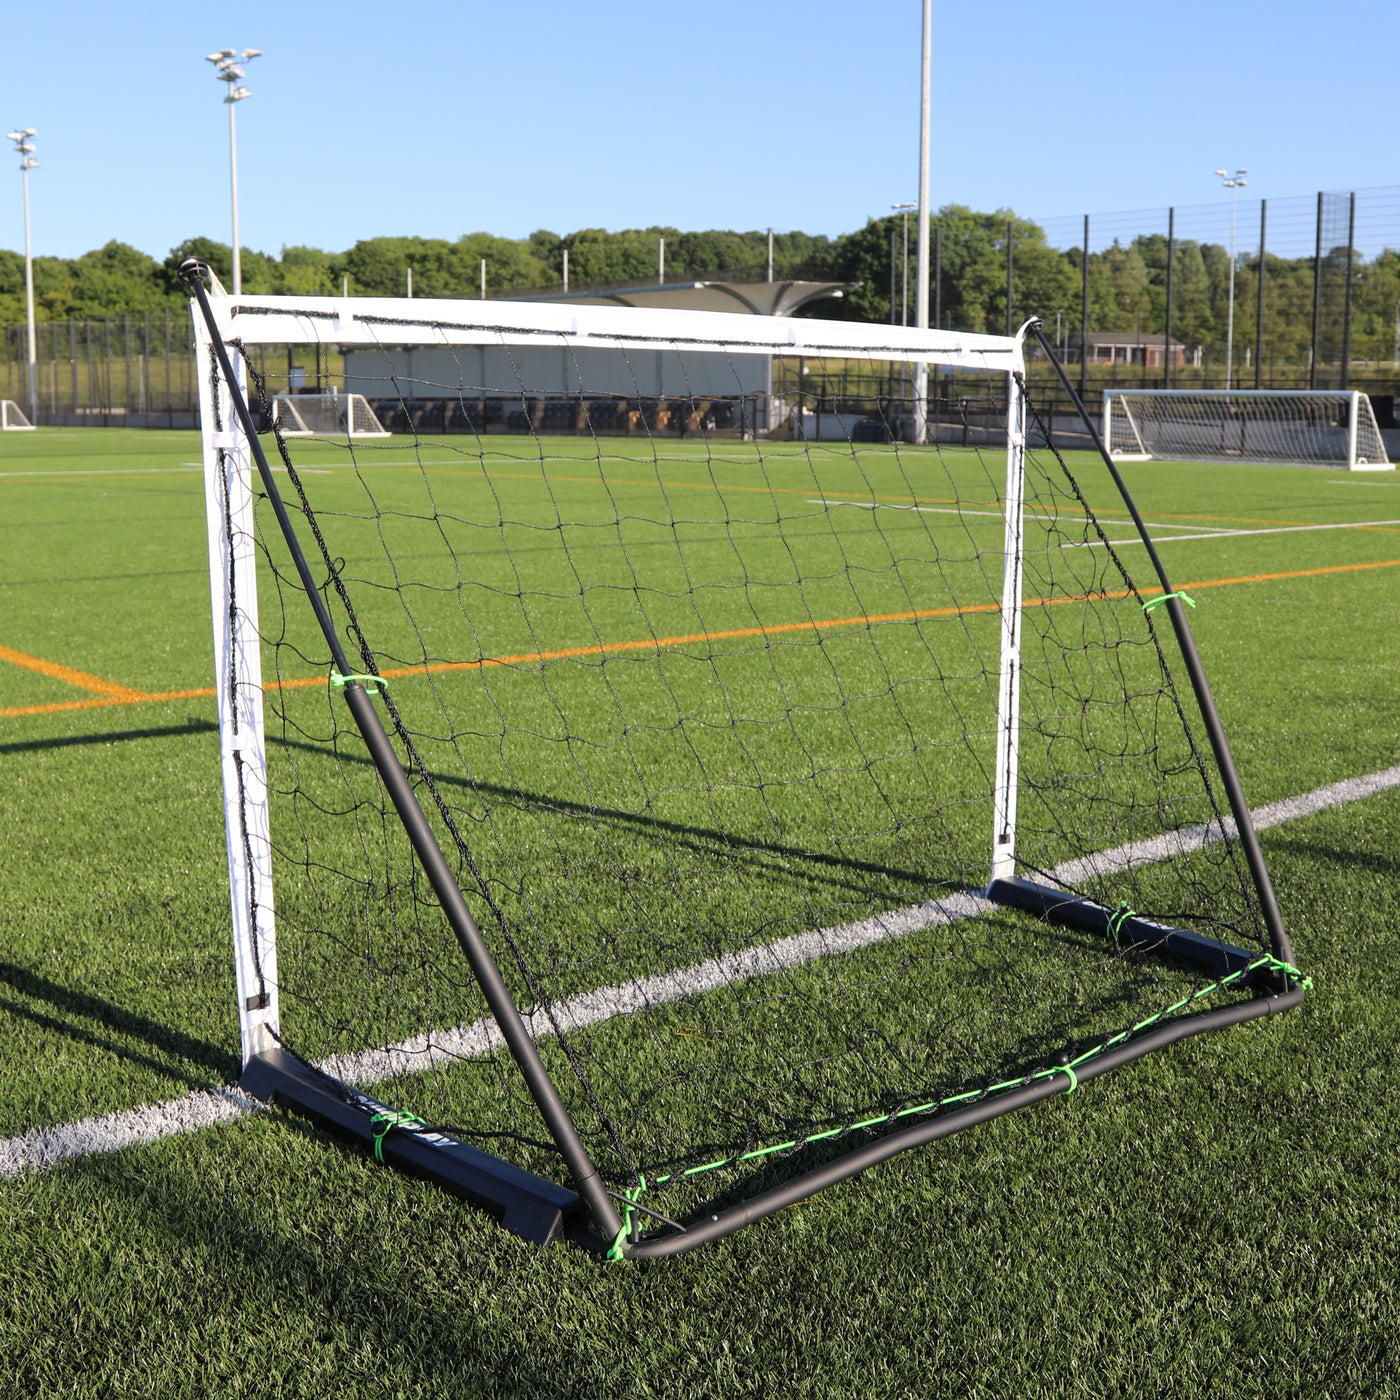 KICKSTER Base Weight (Set of 2) Small Goal Sizes: 1.5x1m > 8x5' - Works with goals purchased after Apr '23